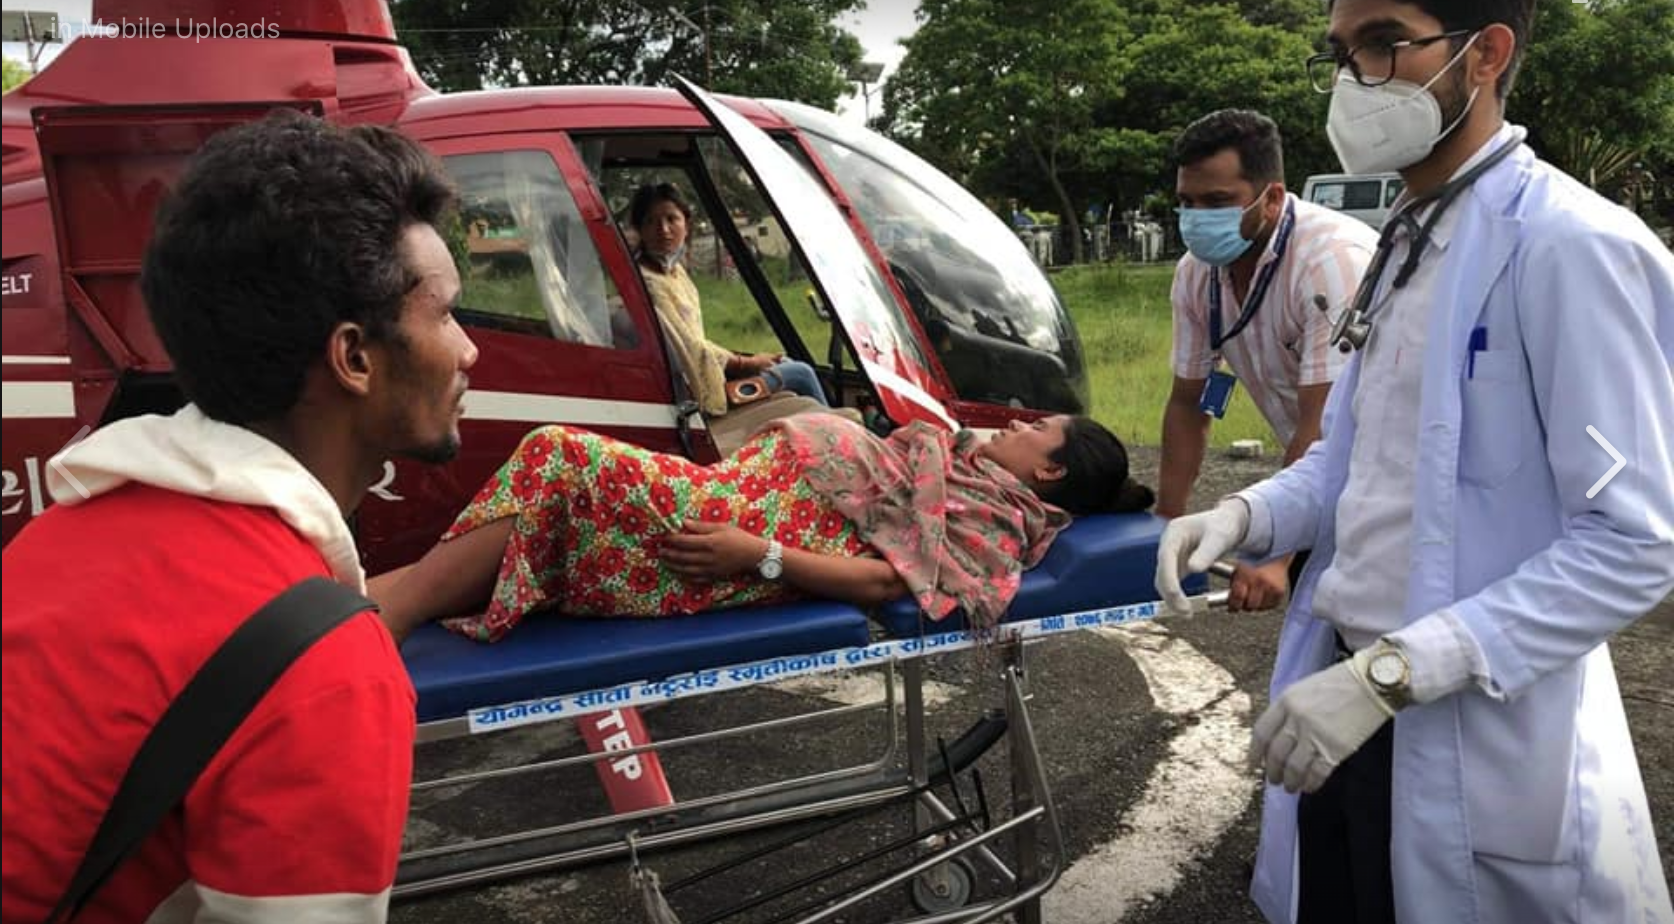 We airlifted Mrs Fulmaya Sunar from Myagdi district following the obstetrics emergency. Thank you Mr Prakash Paudel for supporting the retrieval. Your contribution resulted in the life of Fulmaya and a complete happiness in her family and the community.